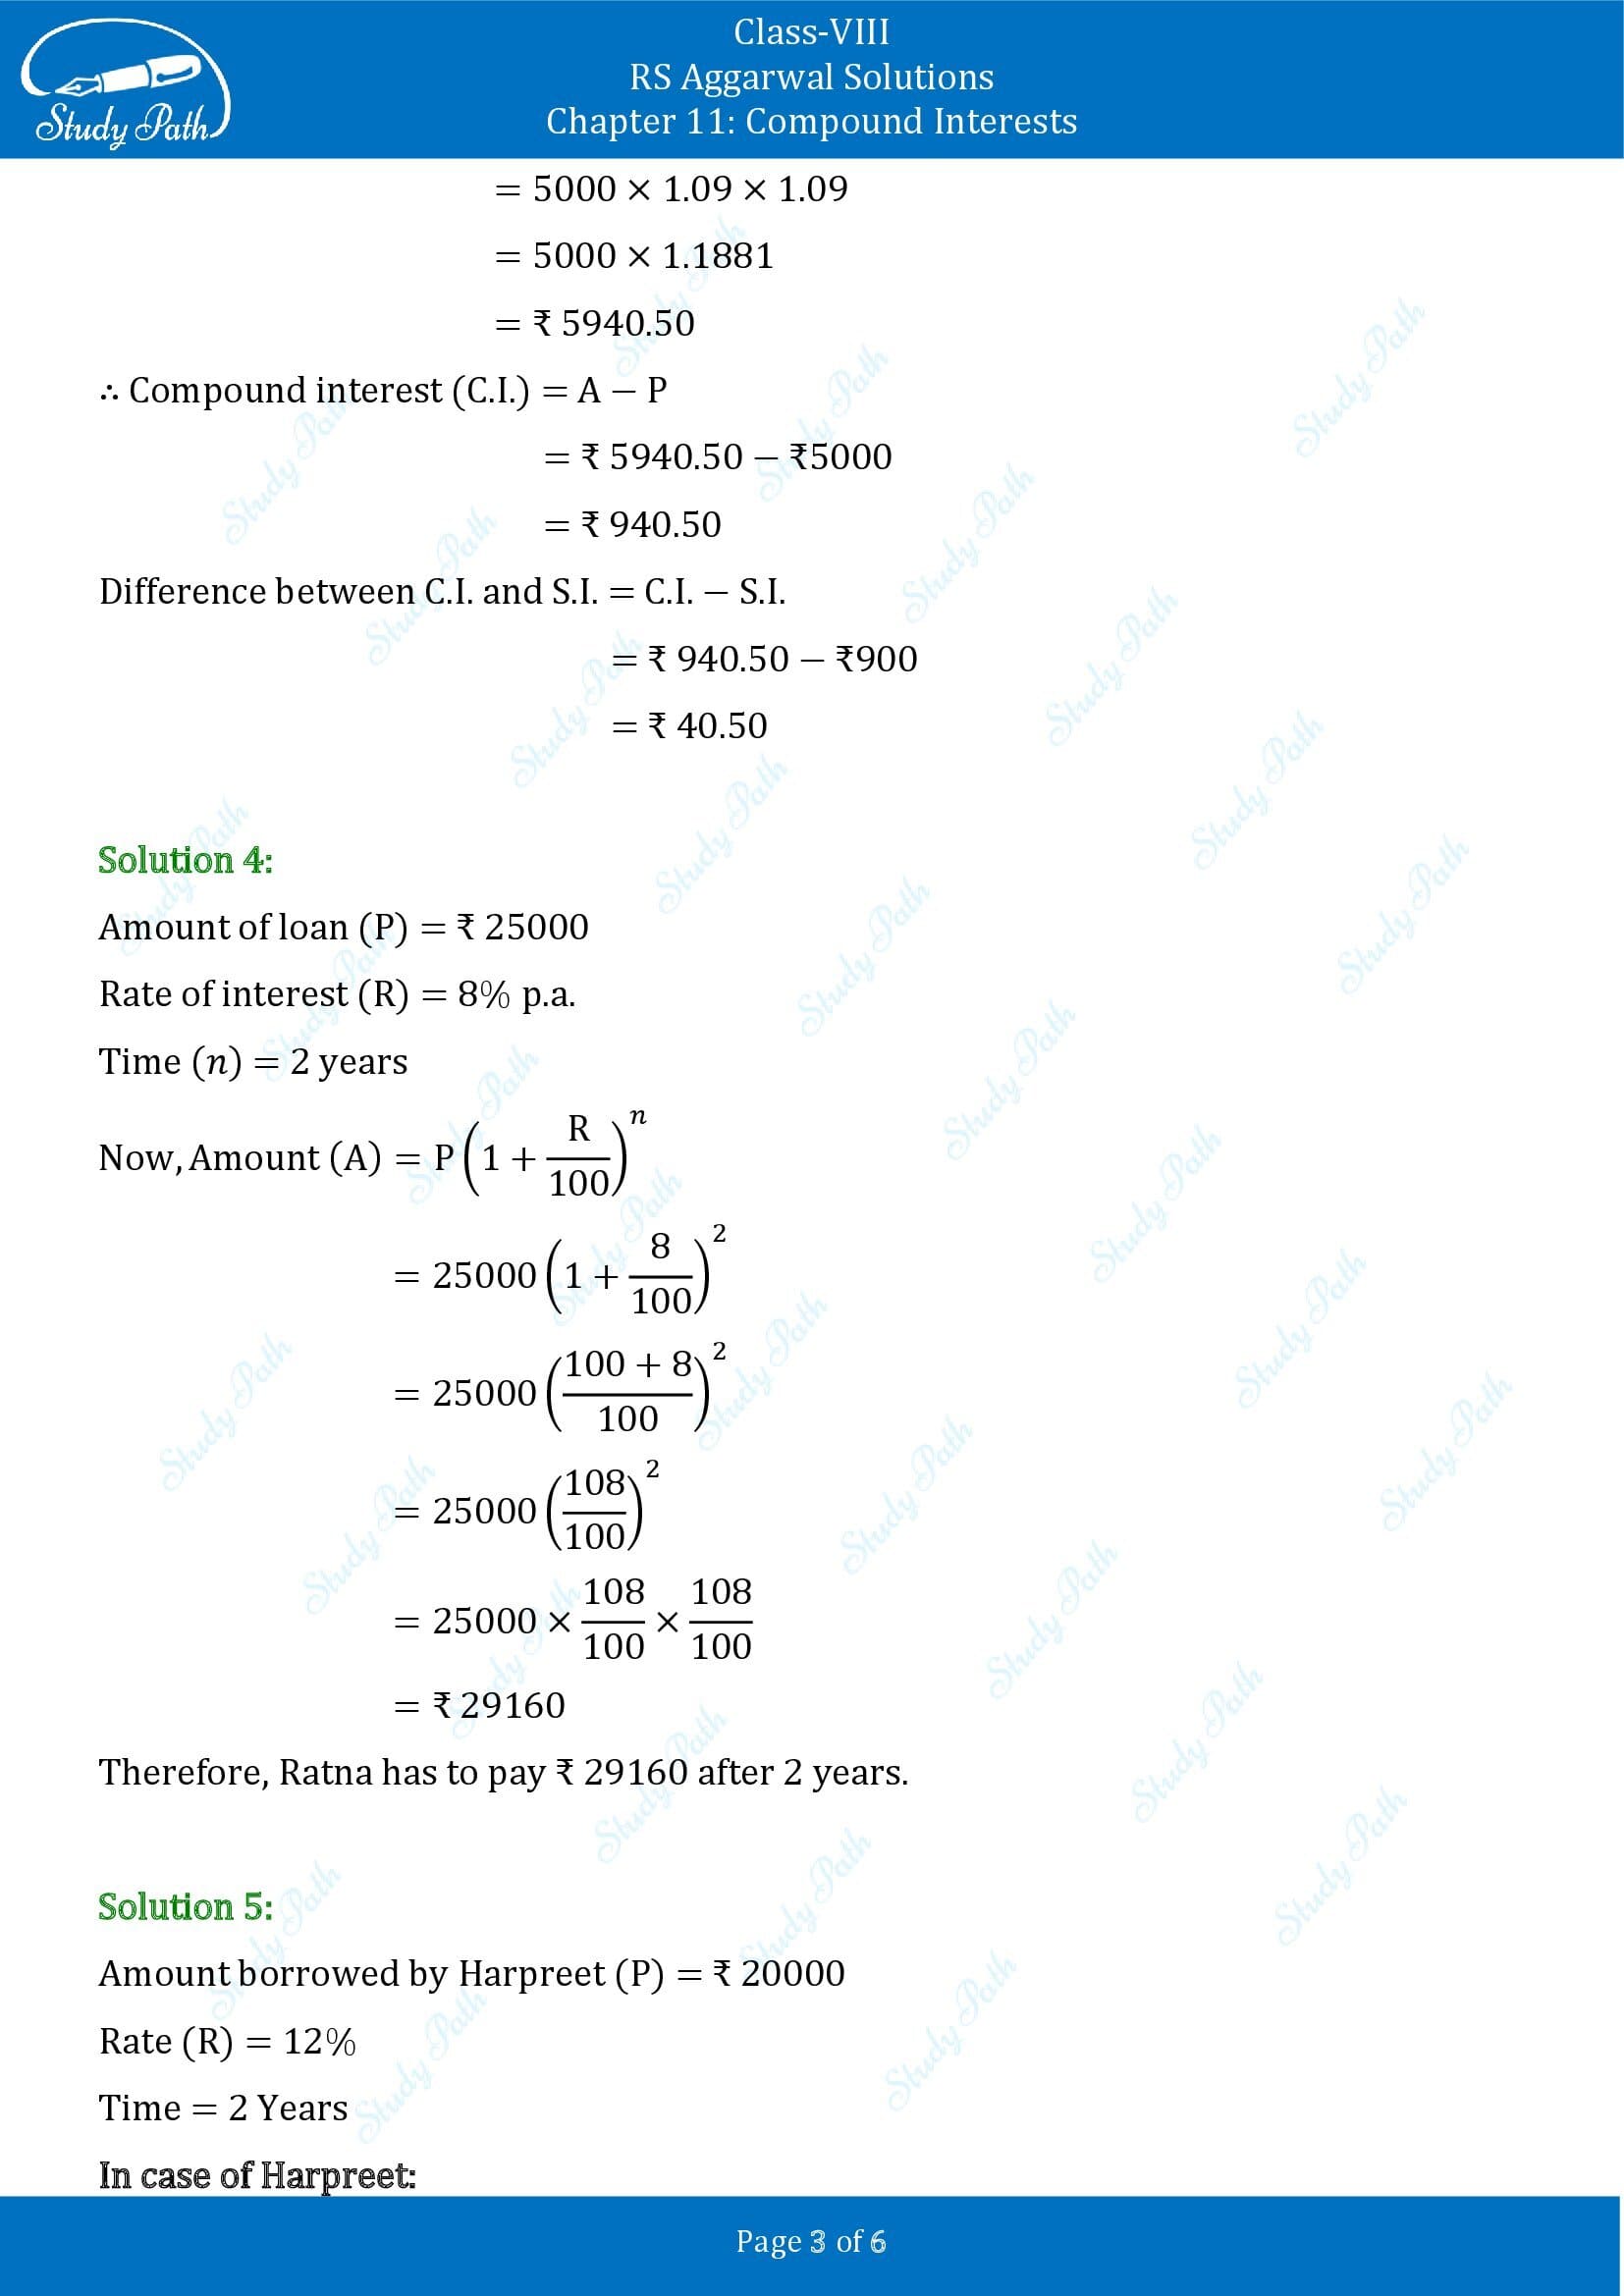 RS Aggarwal Solutions Class 8 Chapter 11 Compound Interests Exercise 11A 00003